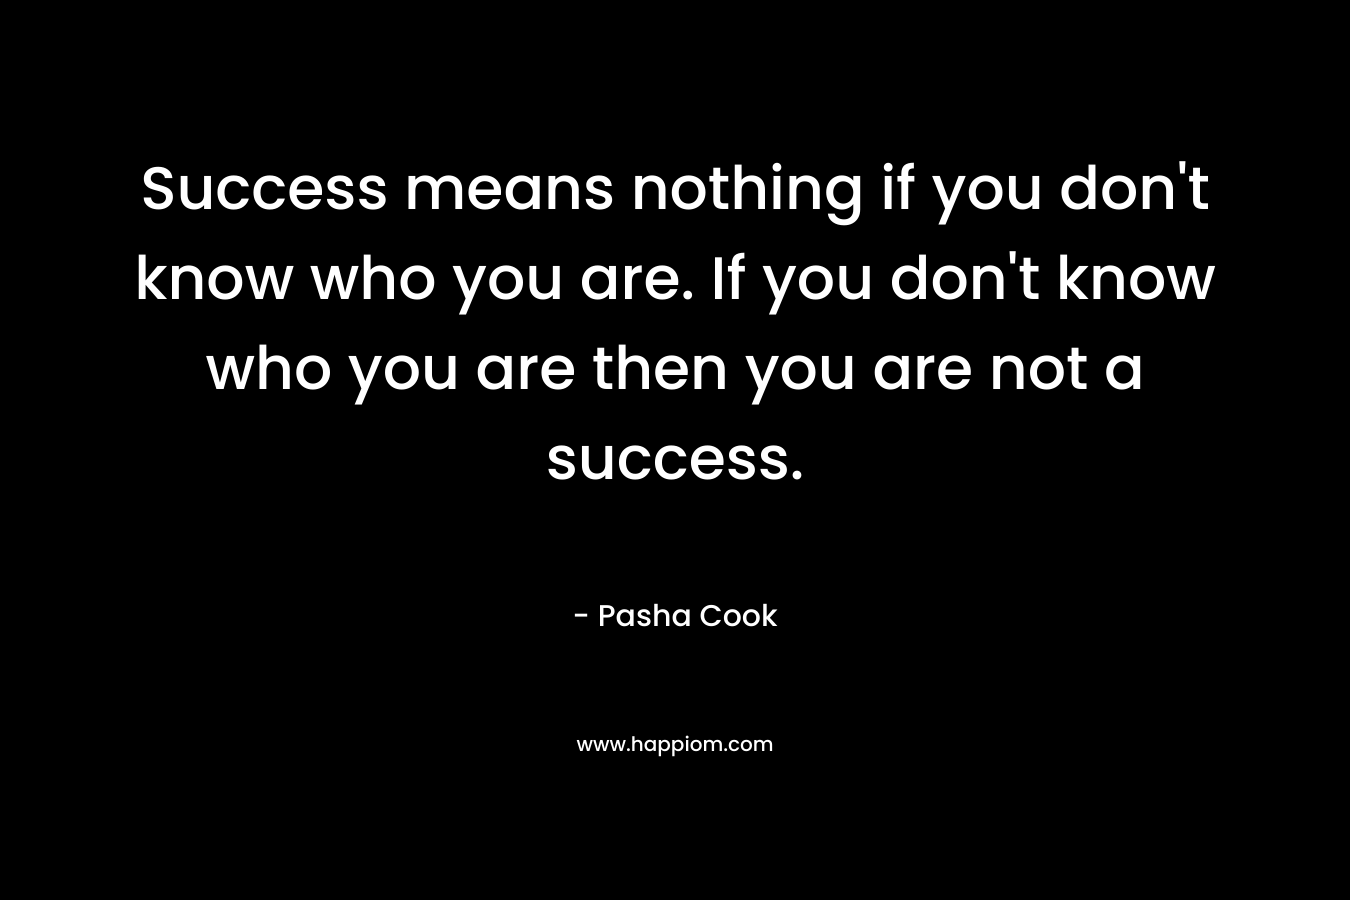 Success means nothing if you don’t know who you are. If you don’t know who you are then you are not a success. – Pasha Cook